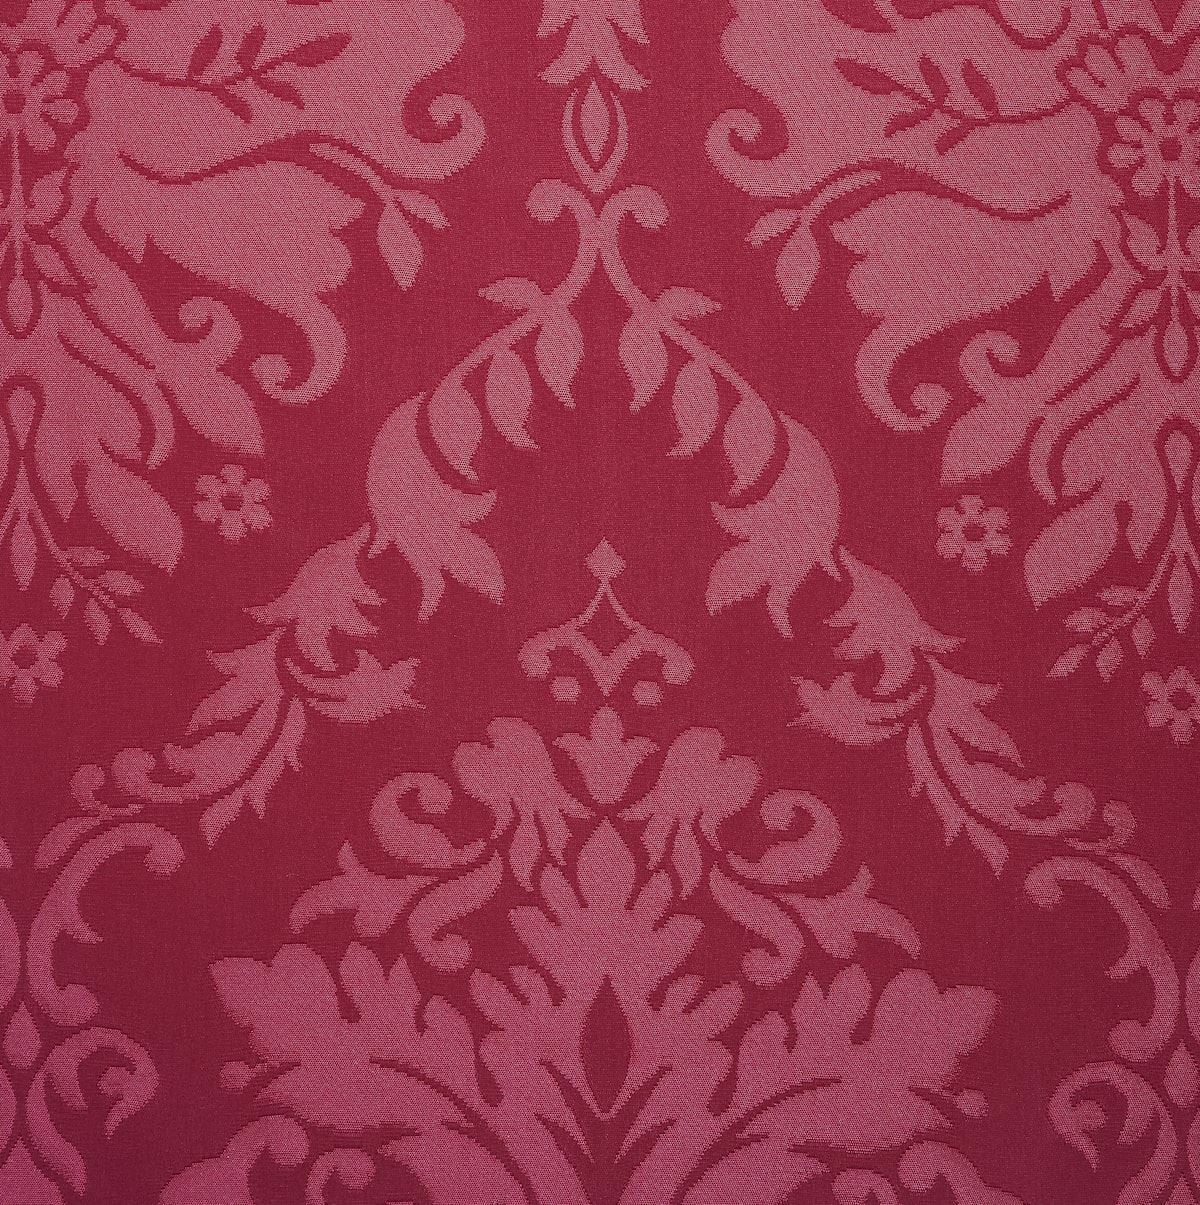 Damask Cross H. cm 160 (63 inch) Acetate Fabric Red Celestial Olive ...